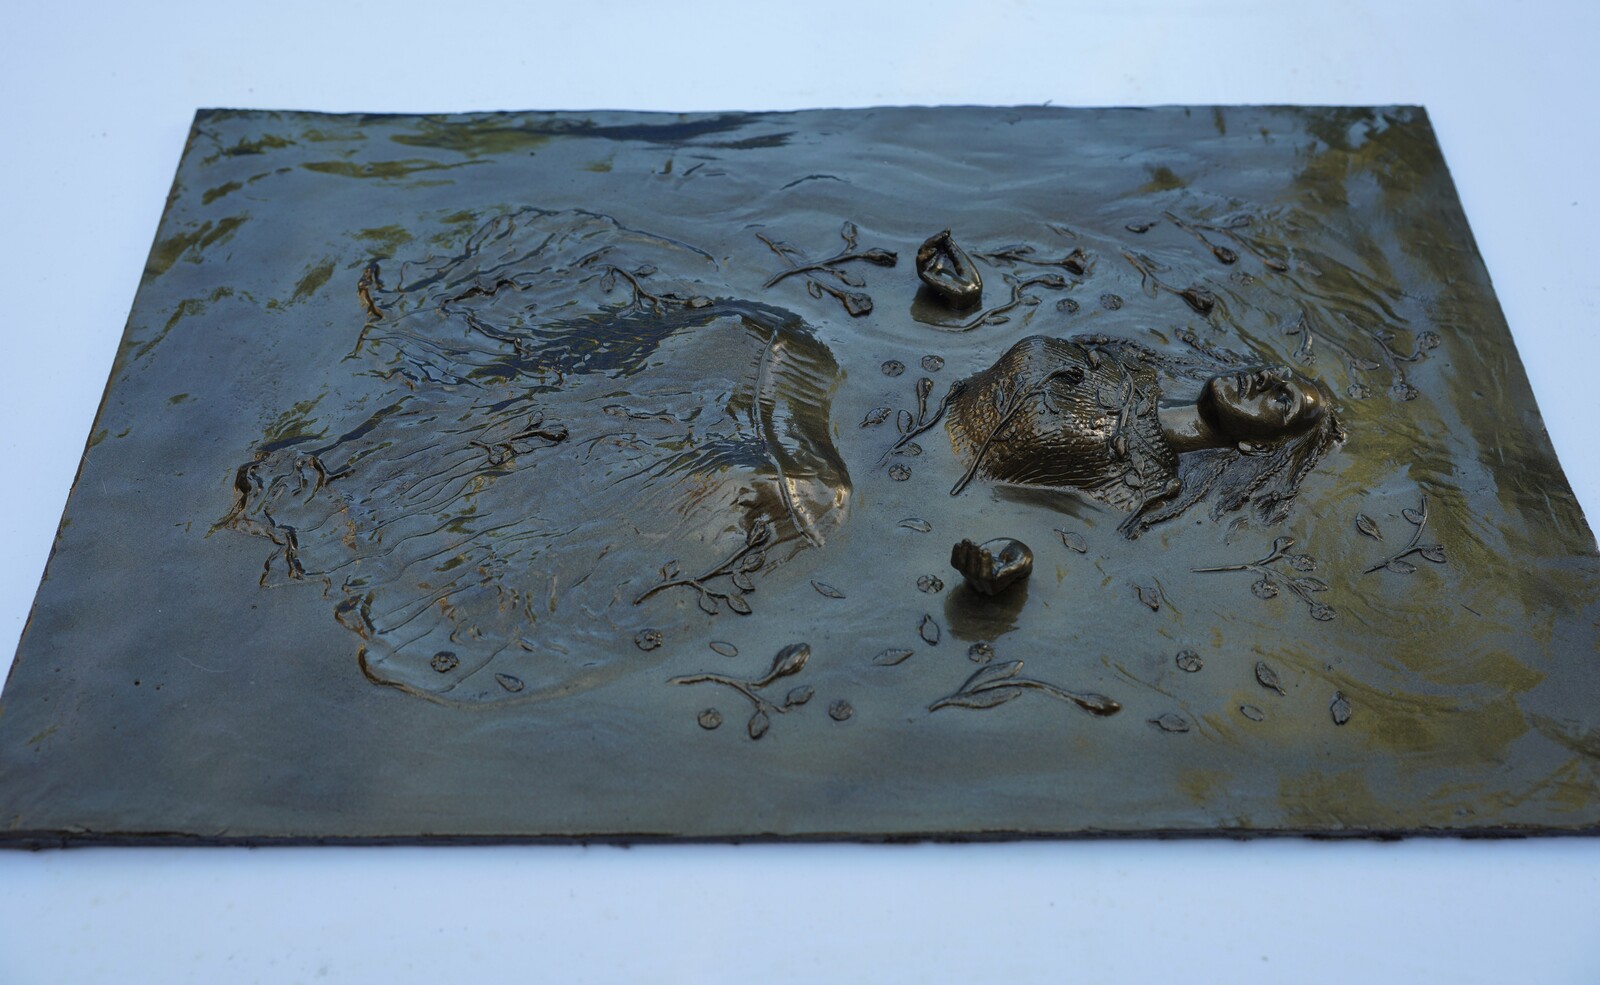 Ophelia base relief sculpture